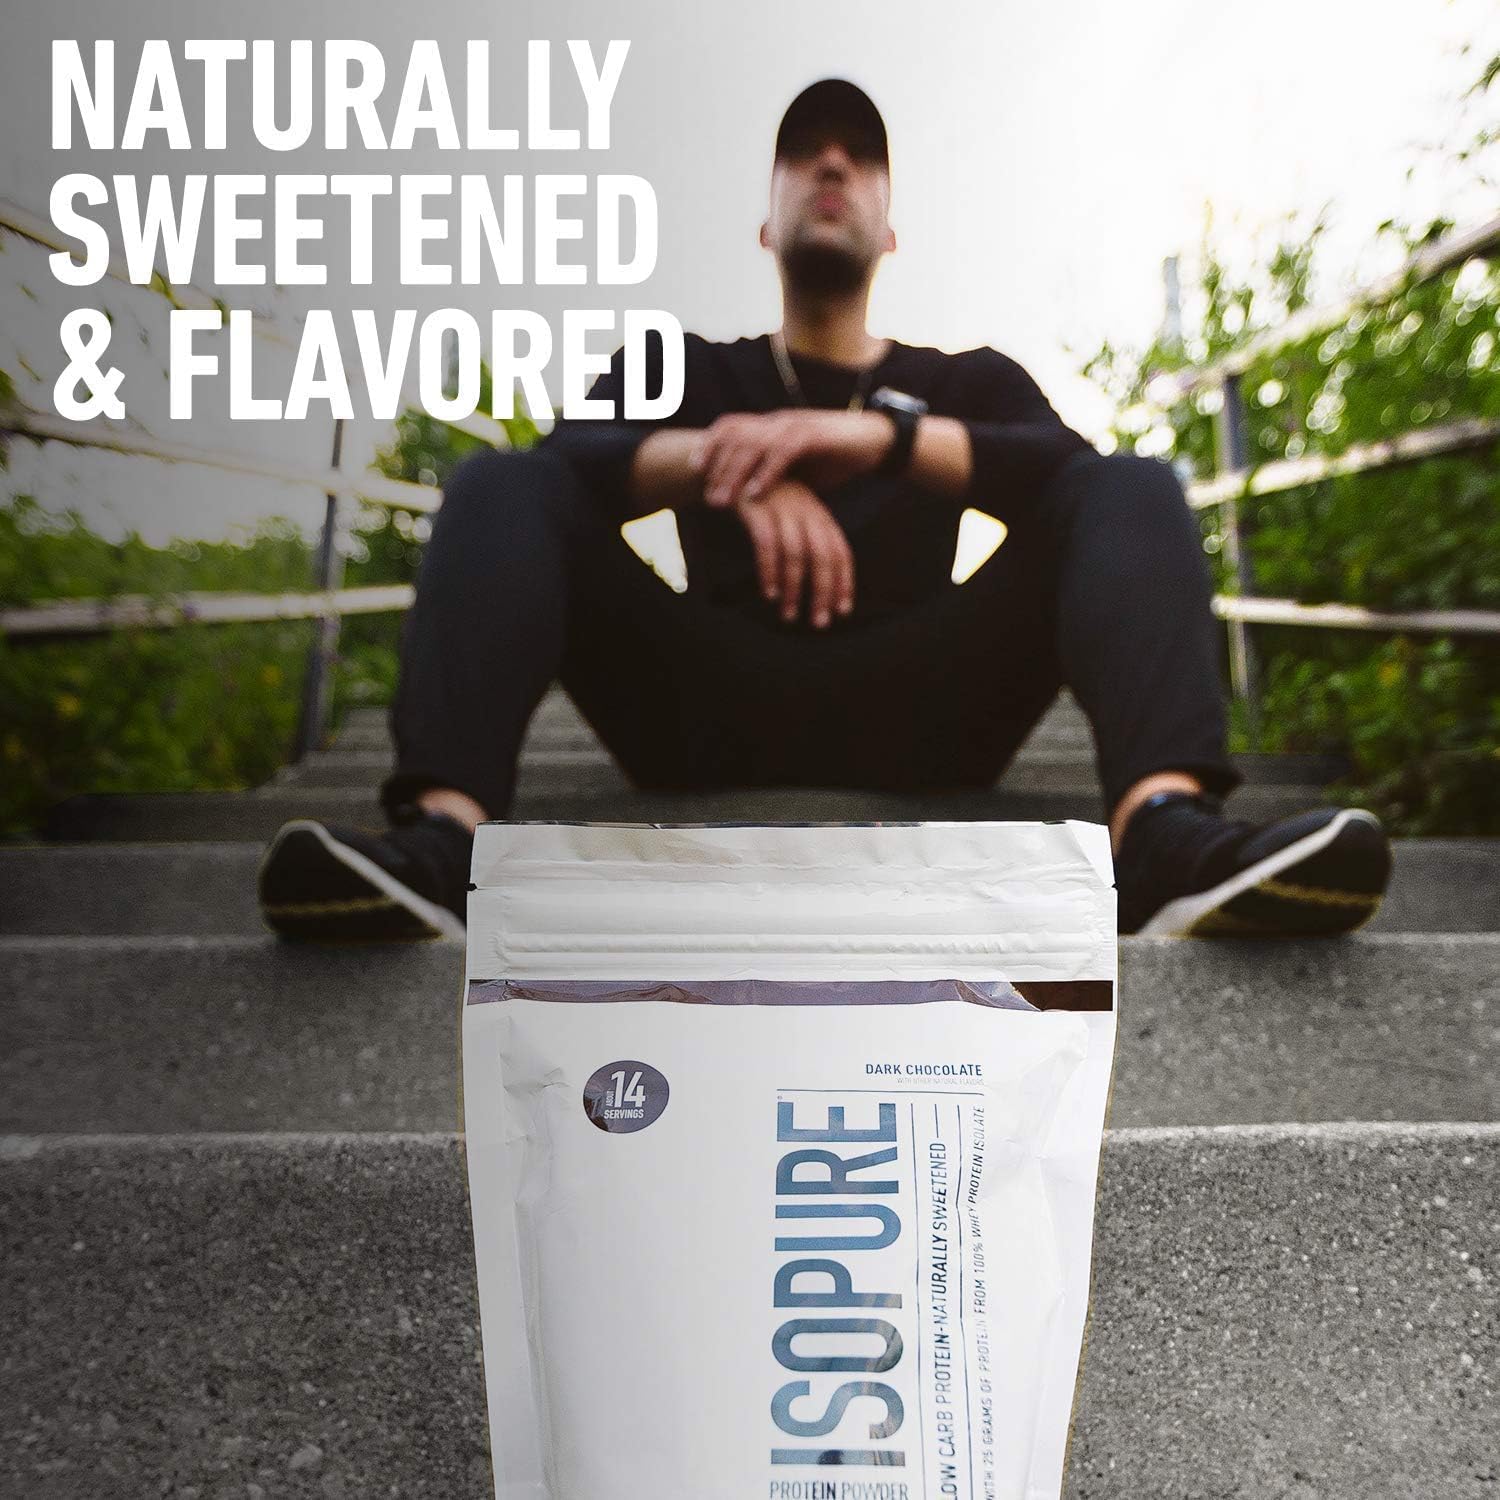 Isopure Protein Powder, Whey Protein Isolate Powder, 25g Protein, Low Carb & Keto Friendly, Naturally Sweetened & Flavored, Flavor: Tahitian Vanilla, 14 Servings, 1 Pound : Health & Household